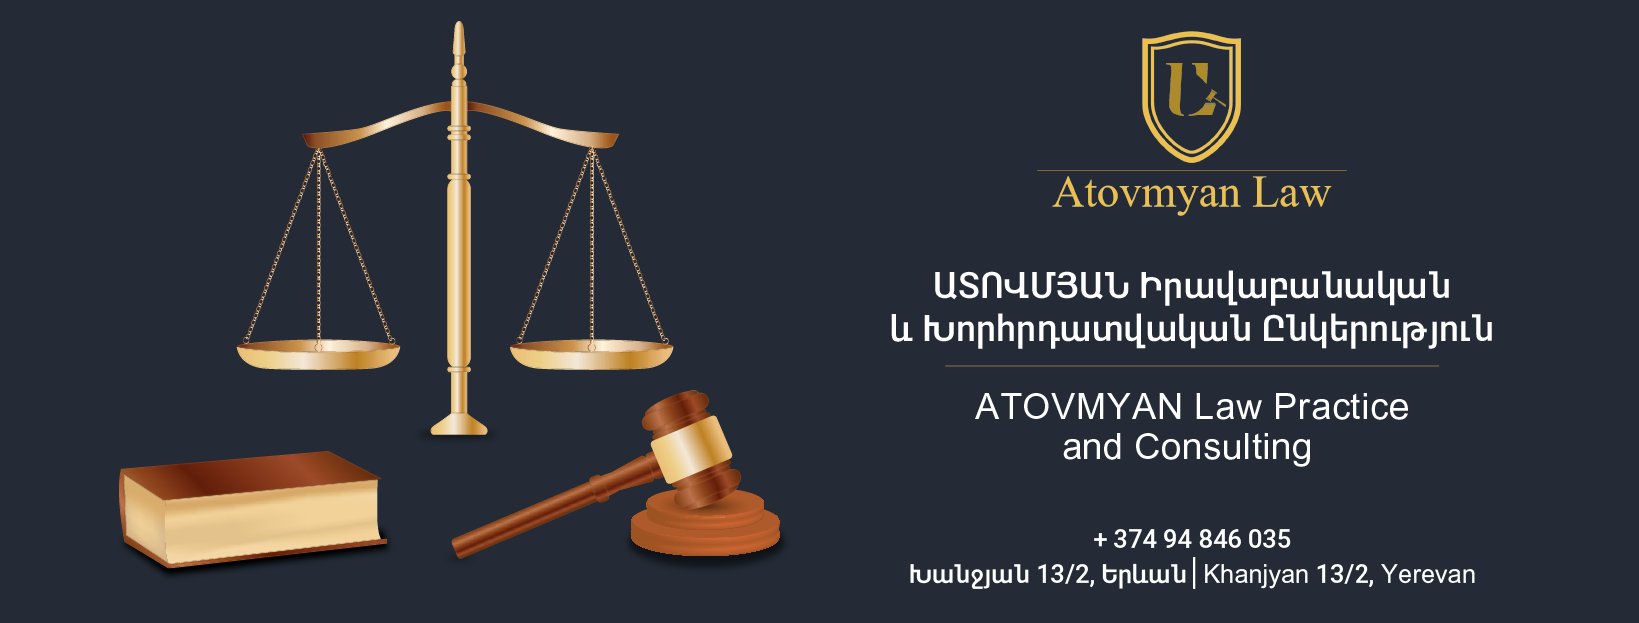 ATOVMYAN Law Practice and Consulting cover photo